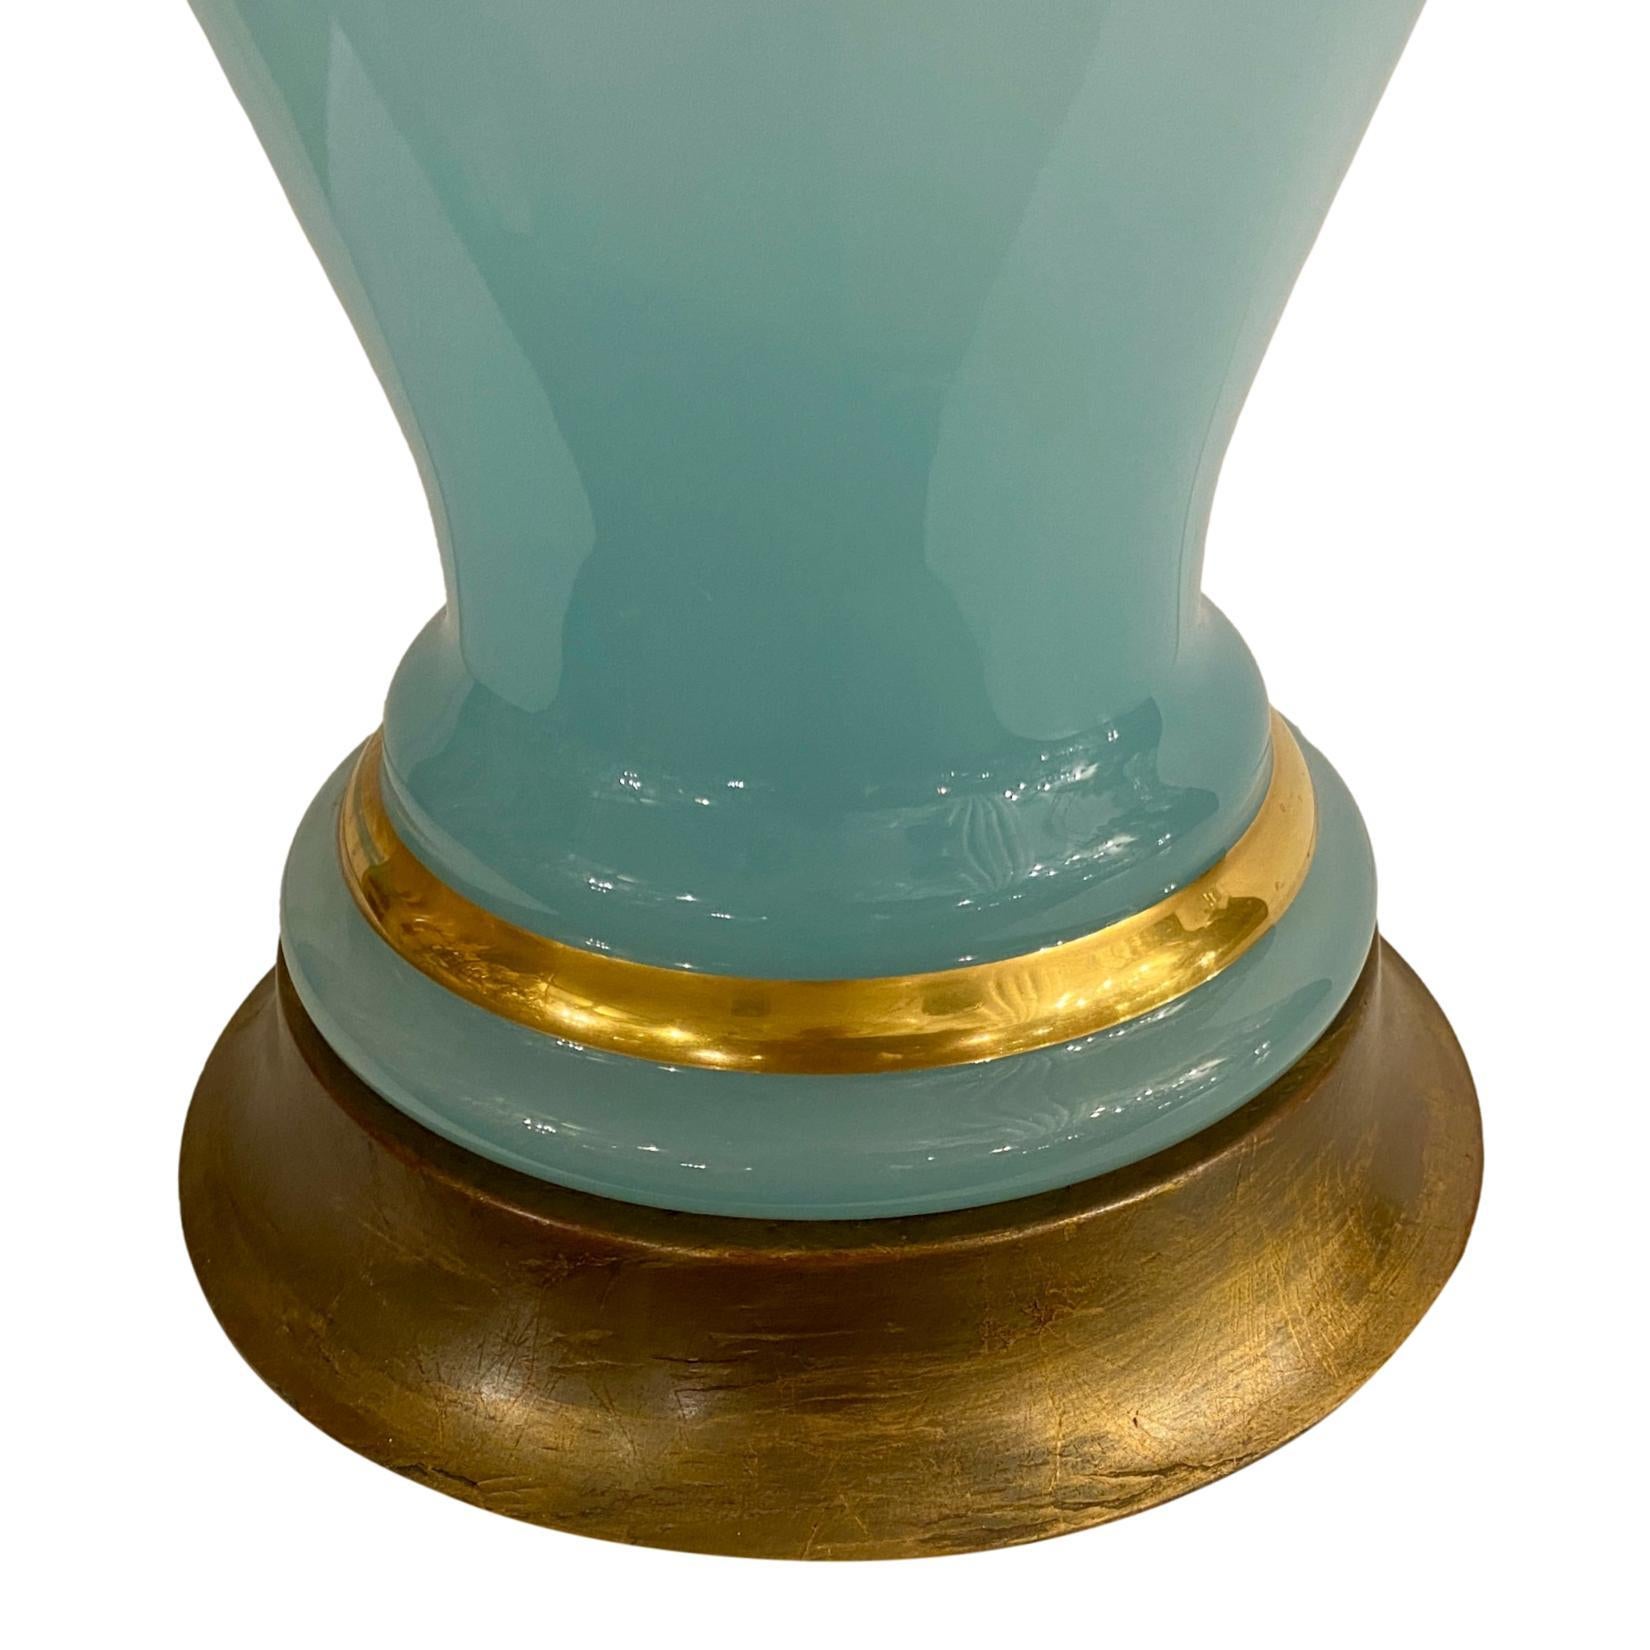 A circa 1920's French light blue opaline table lamp with gilt details on body.

Measurements:
Height of body: 23